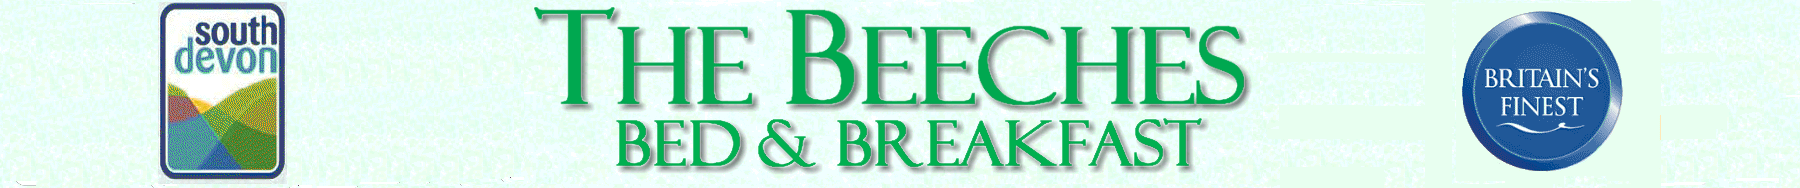 The Beeches Bed & Breakfast